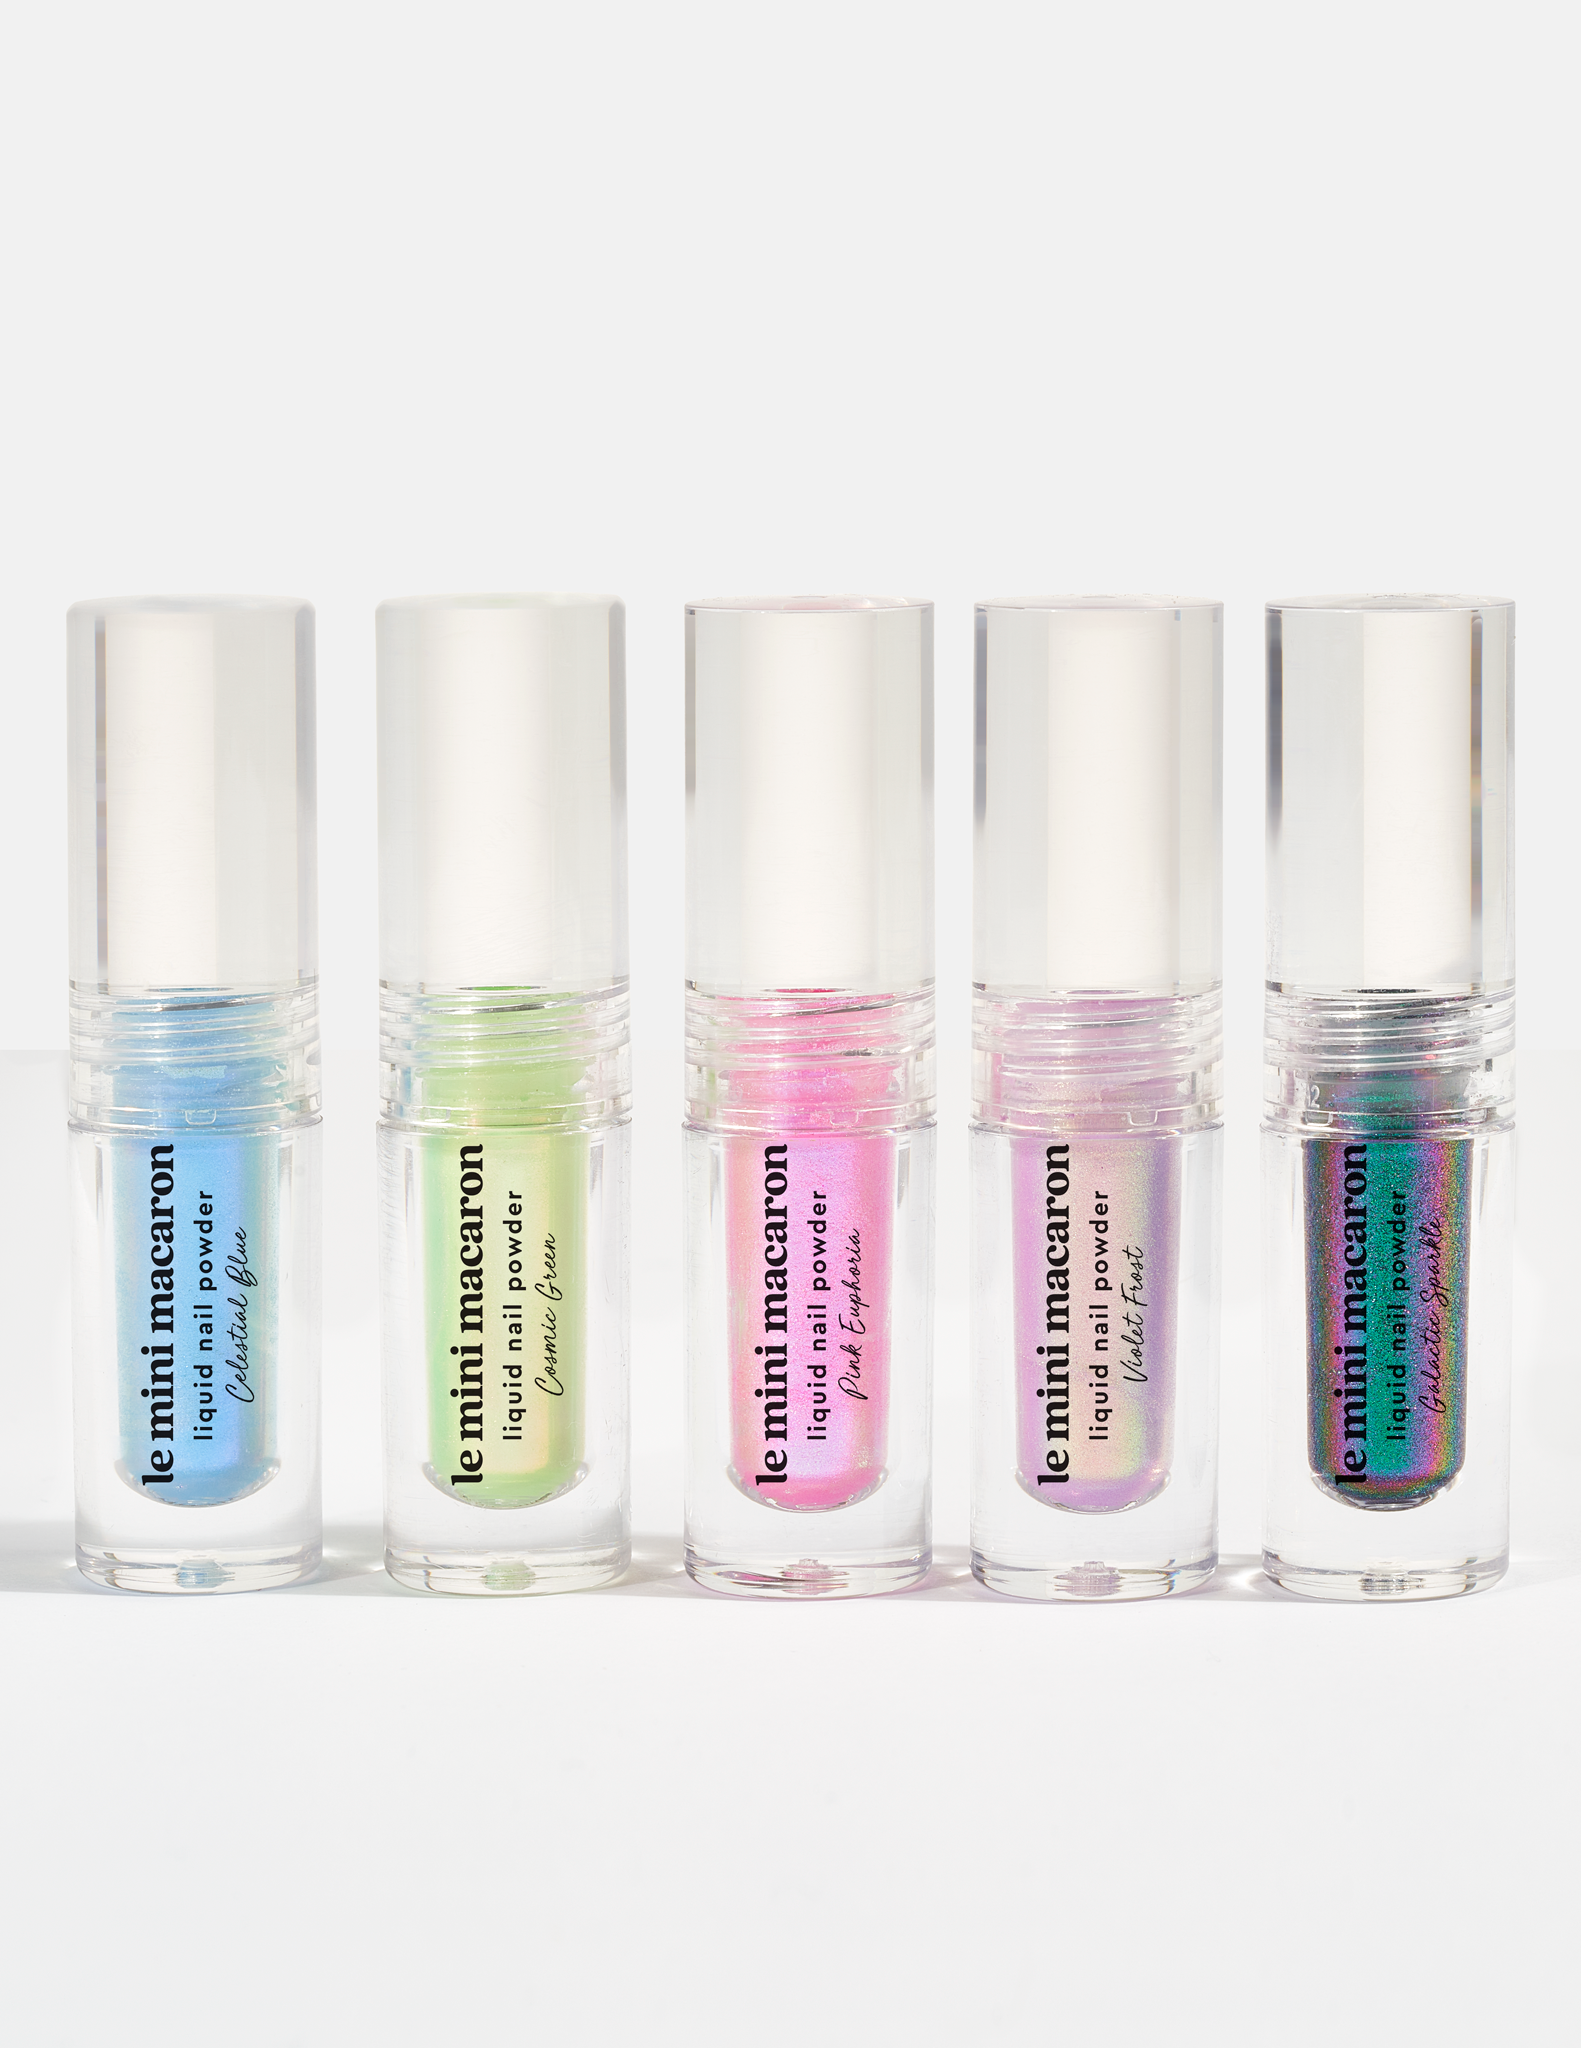 Stardust Liquid Nail Powders: Take Your Mani to Cosmic Heights!